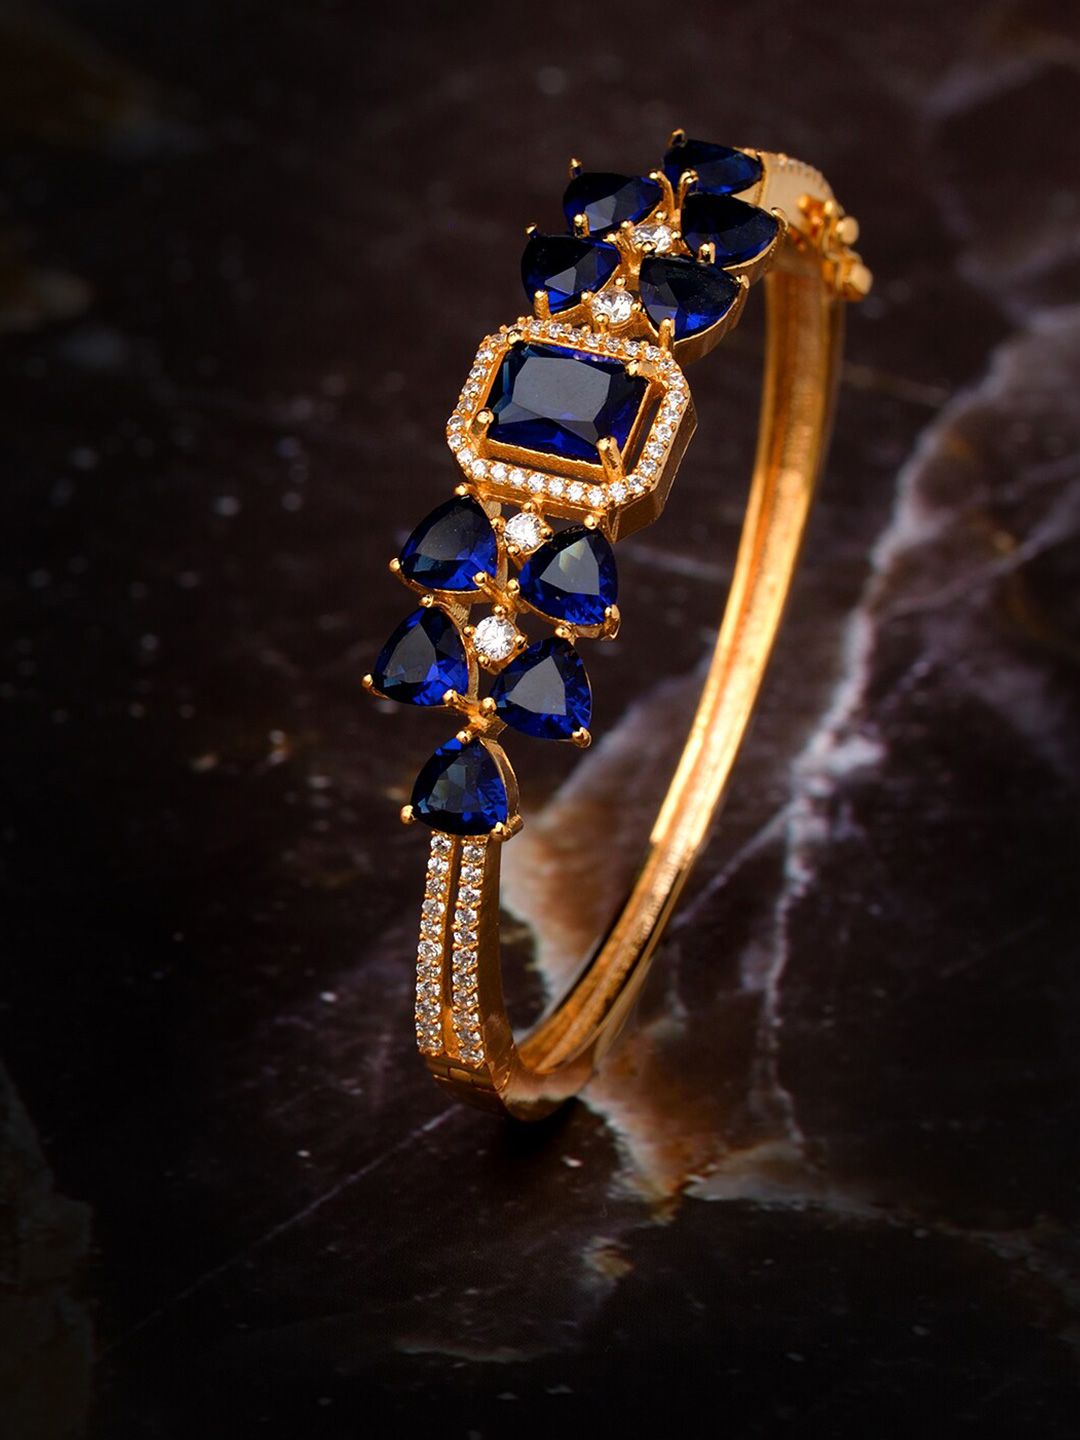 Saraf RS Jewellery Brass Gold-Plated & Blue Handcrafted Bangle-Style Bracelet Price in India